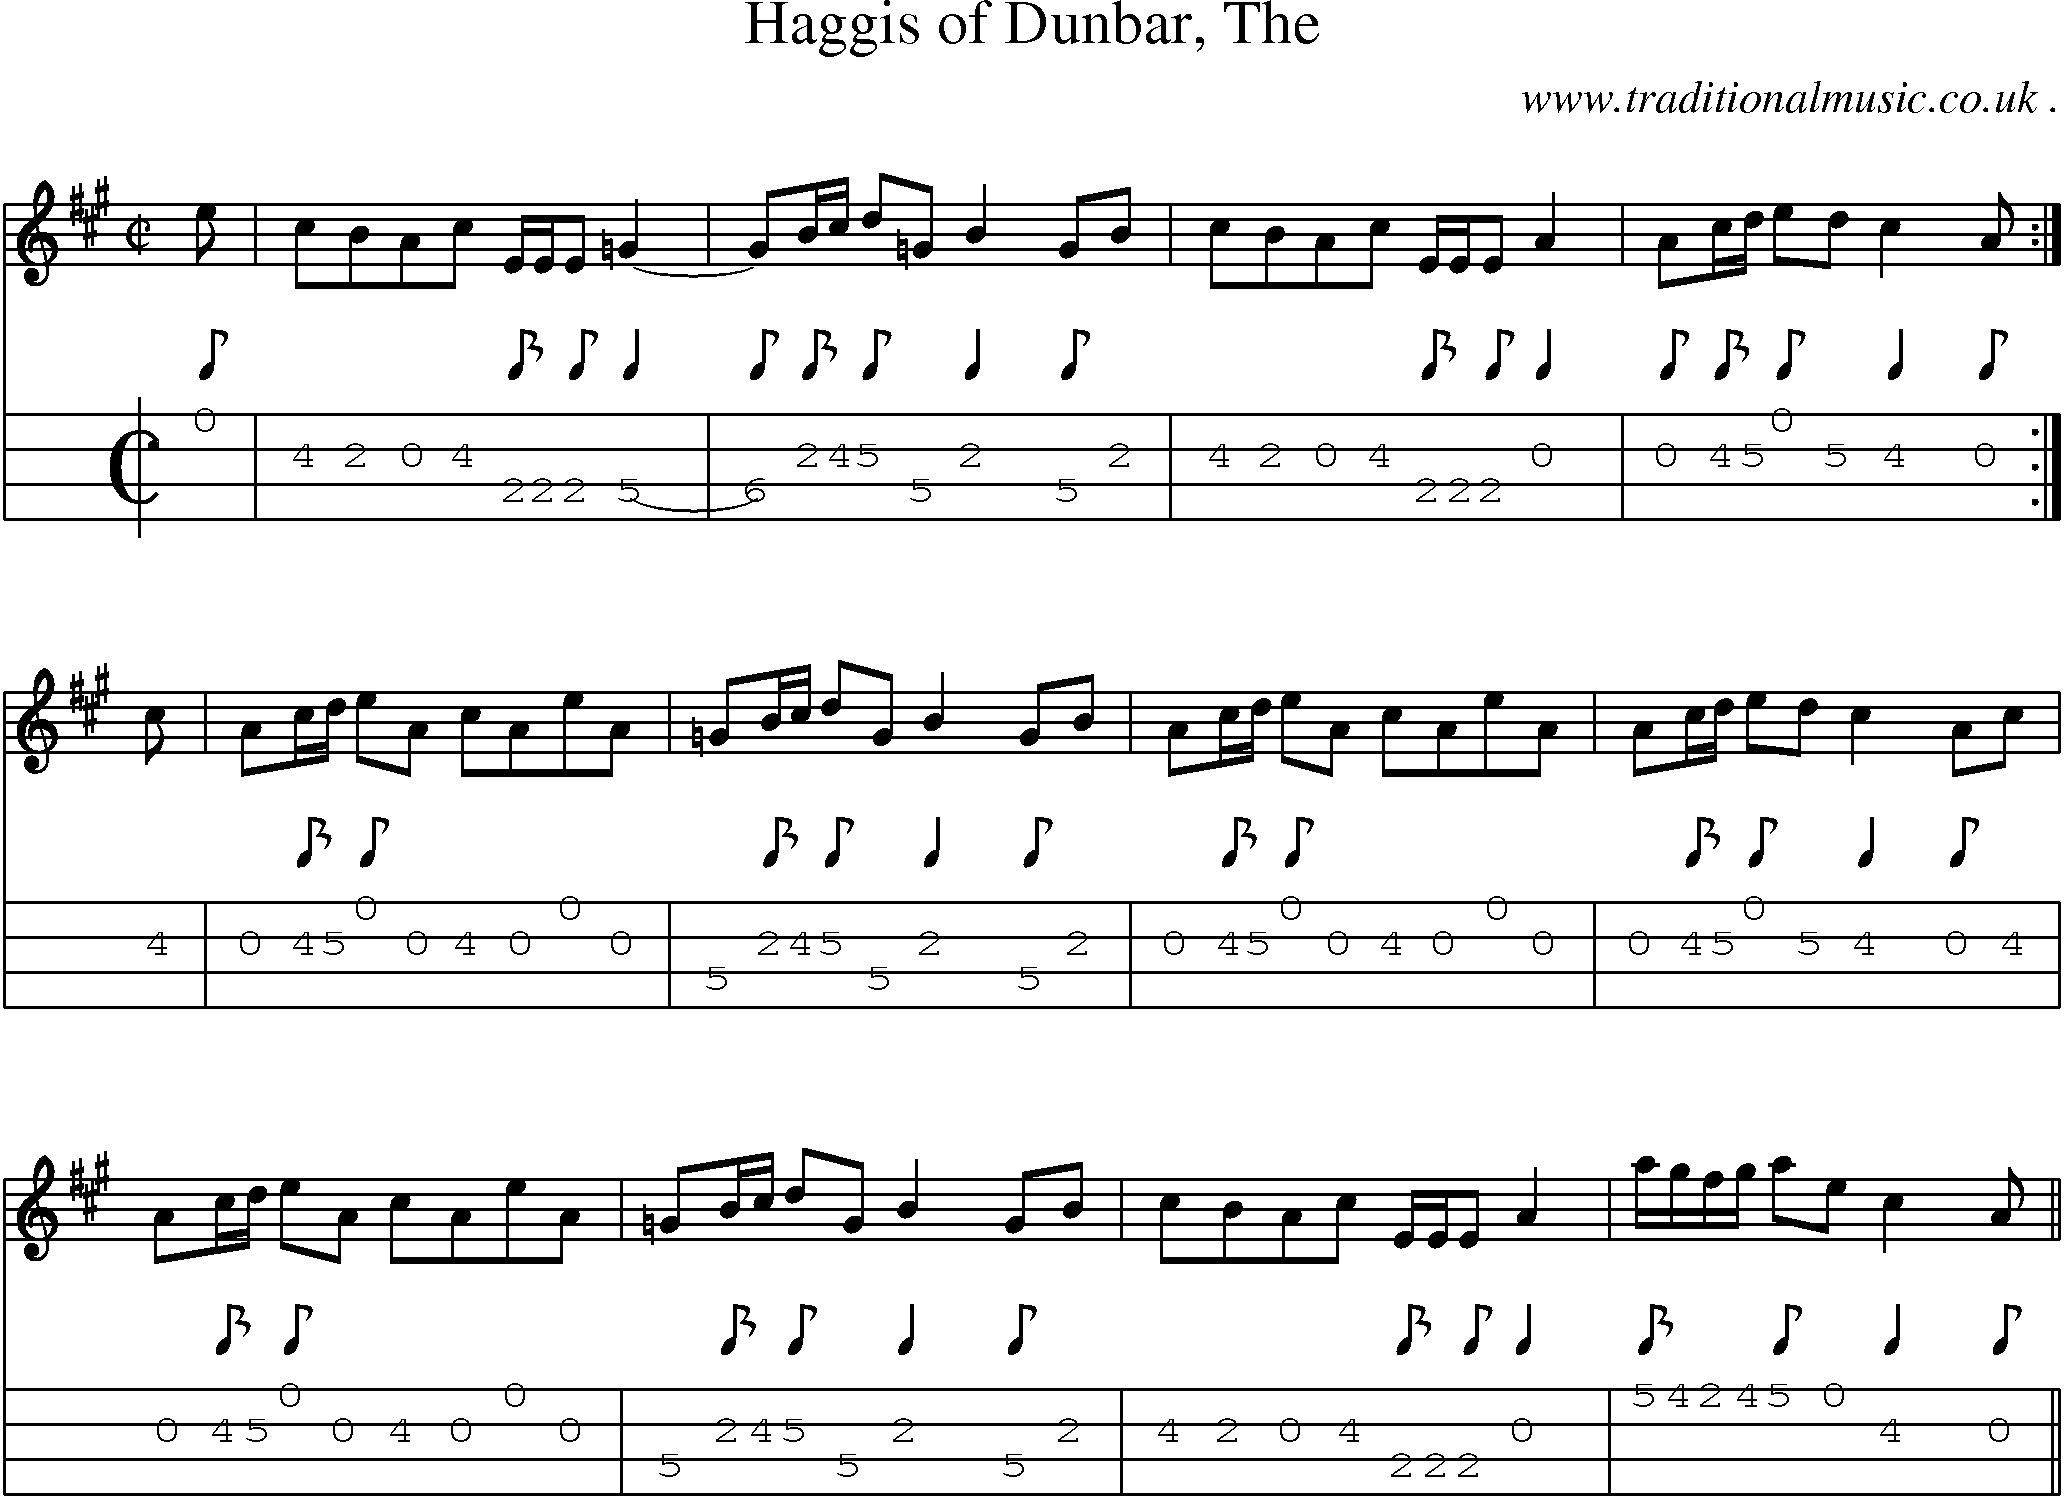 Sheet-music  score, Chords and Mandolin Tabs for Haggis Of Dunbar The